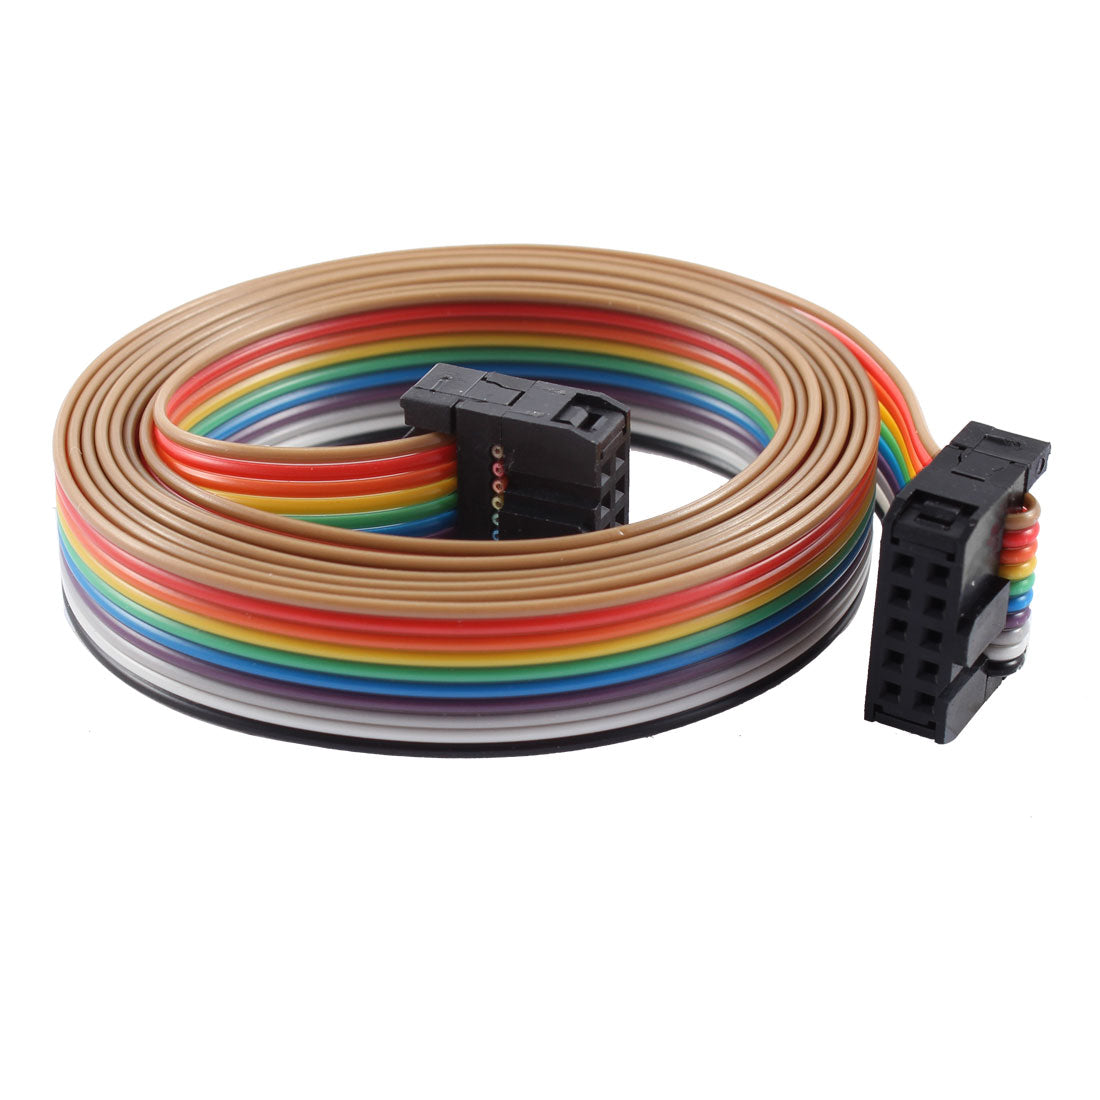 uxcell Uxcell 2.54mm Pitch 10 Pin 10 Way F/F Connector IDC Flat Rainbow Ribbon Cable 118cm